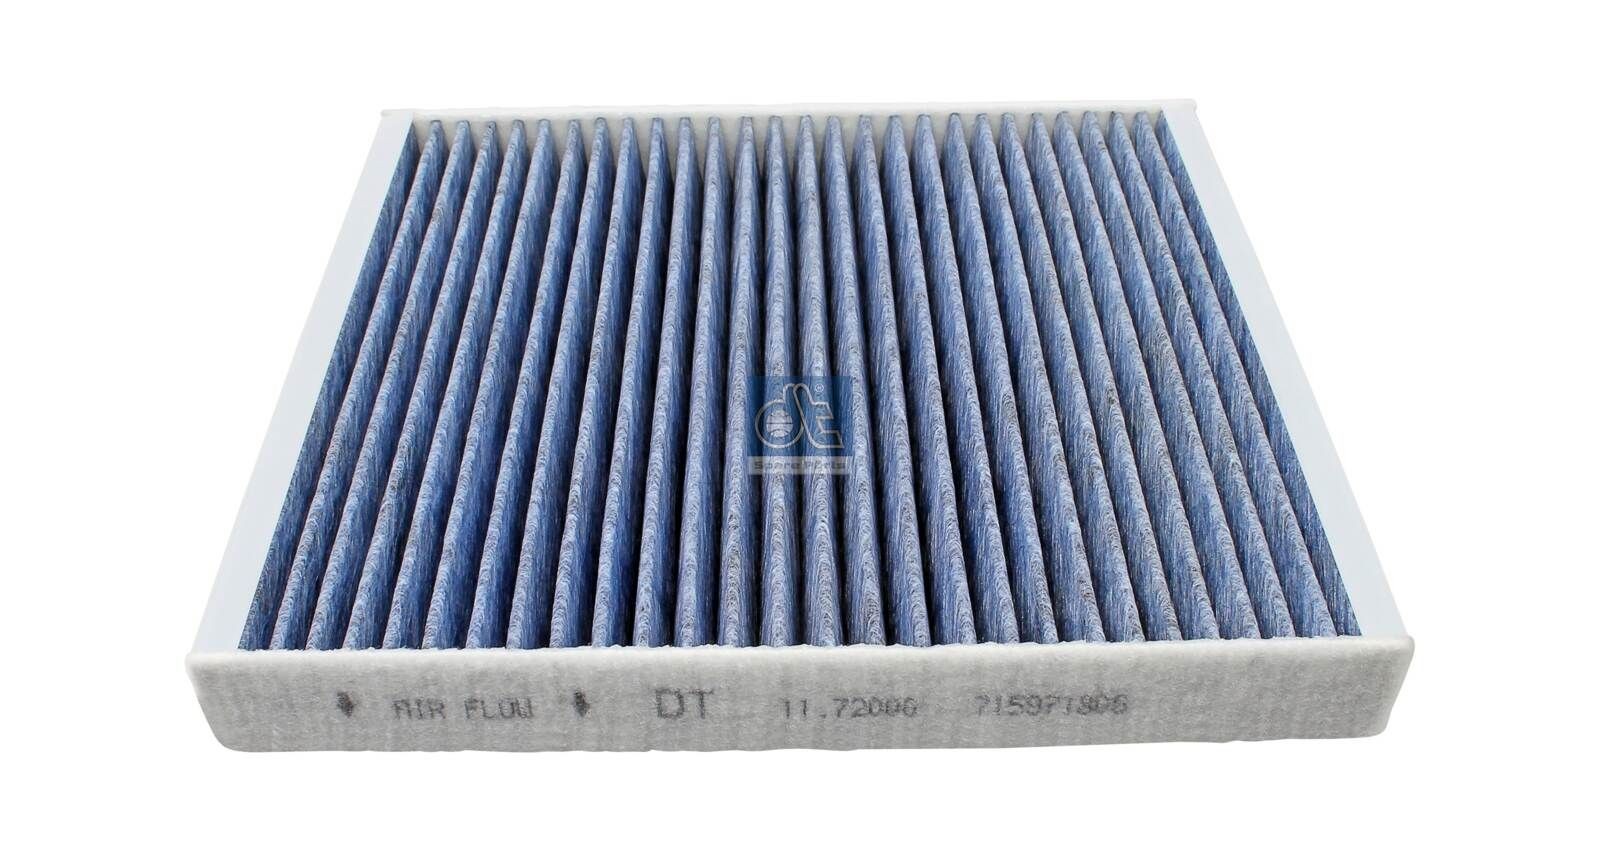 11.72000 DT Spare Parts Pollen filter SAAB bio-functional cabin air filter, 254 mm x 235 mm x 32 mm